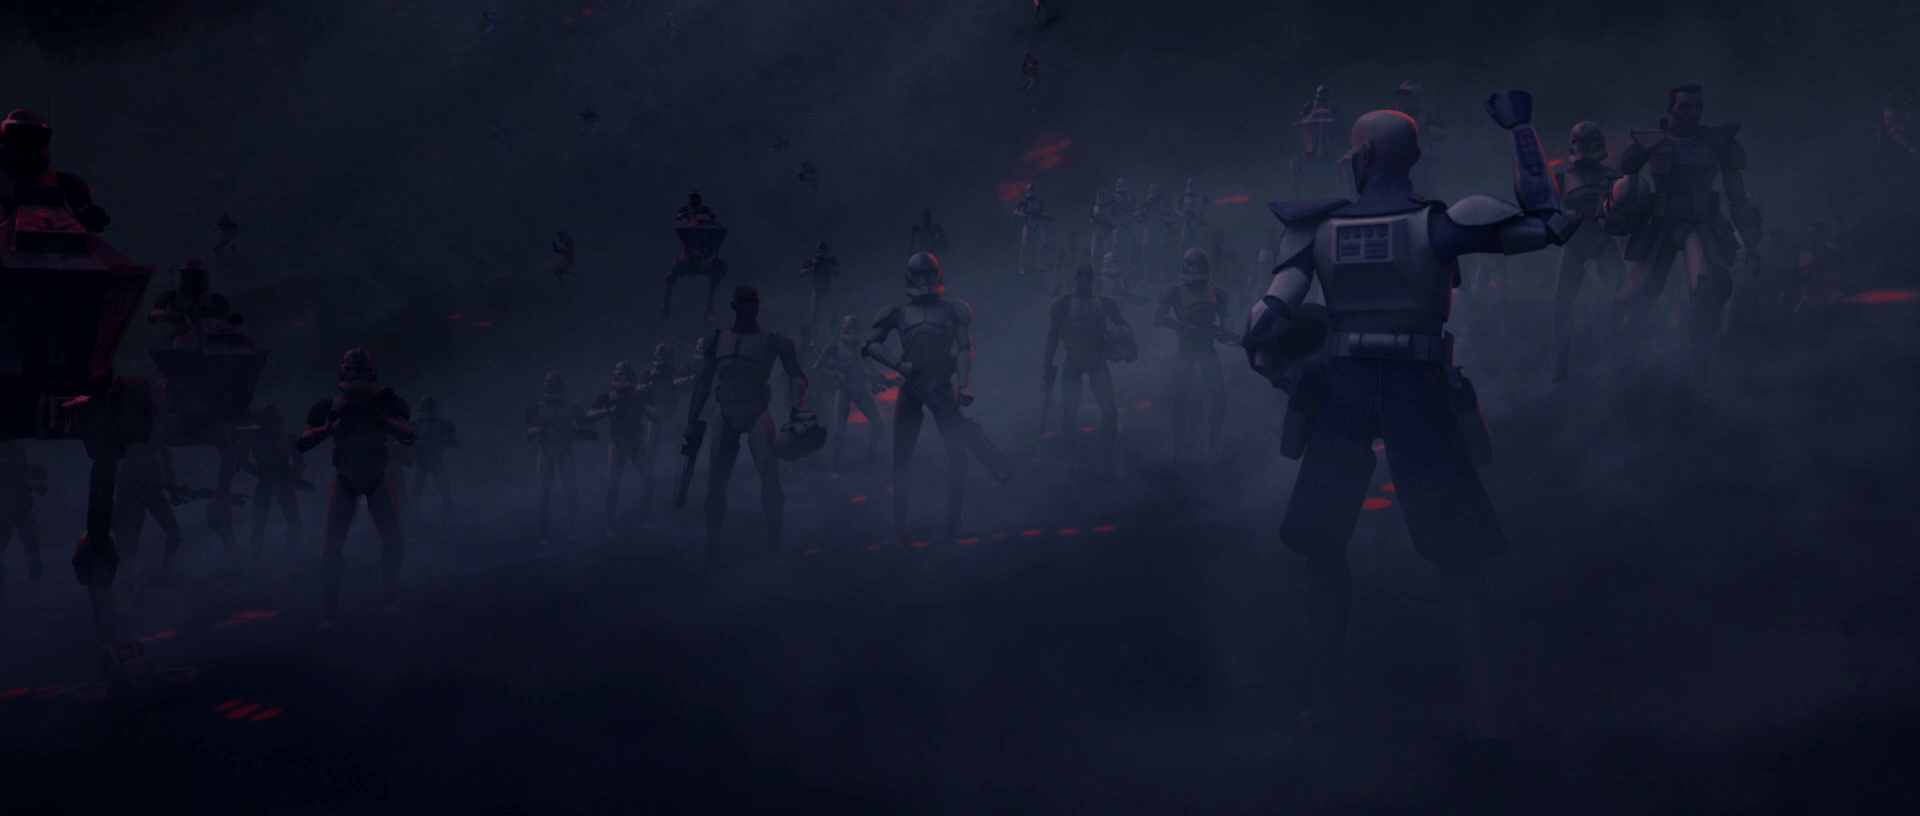 CT 7567 Relays The Plan Of Attack To The 501st Clone Troopers